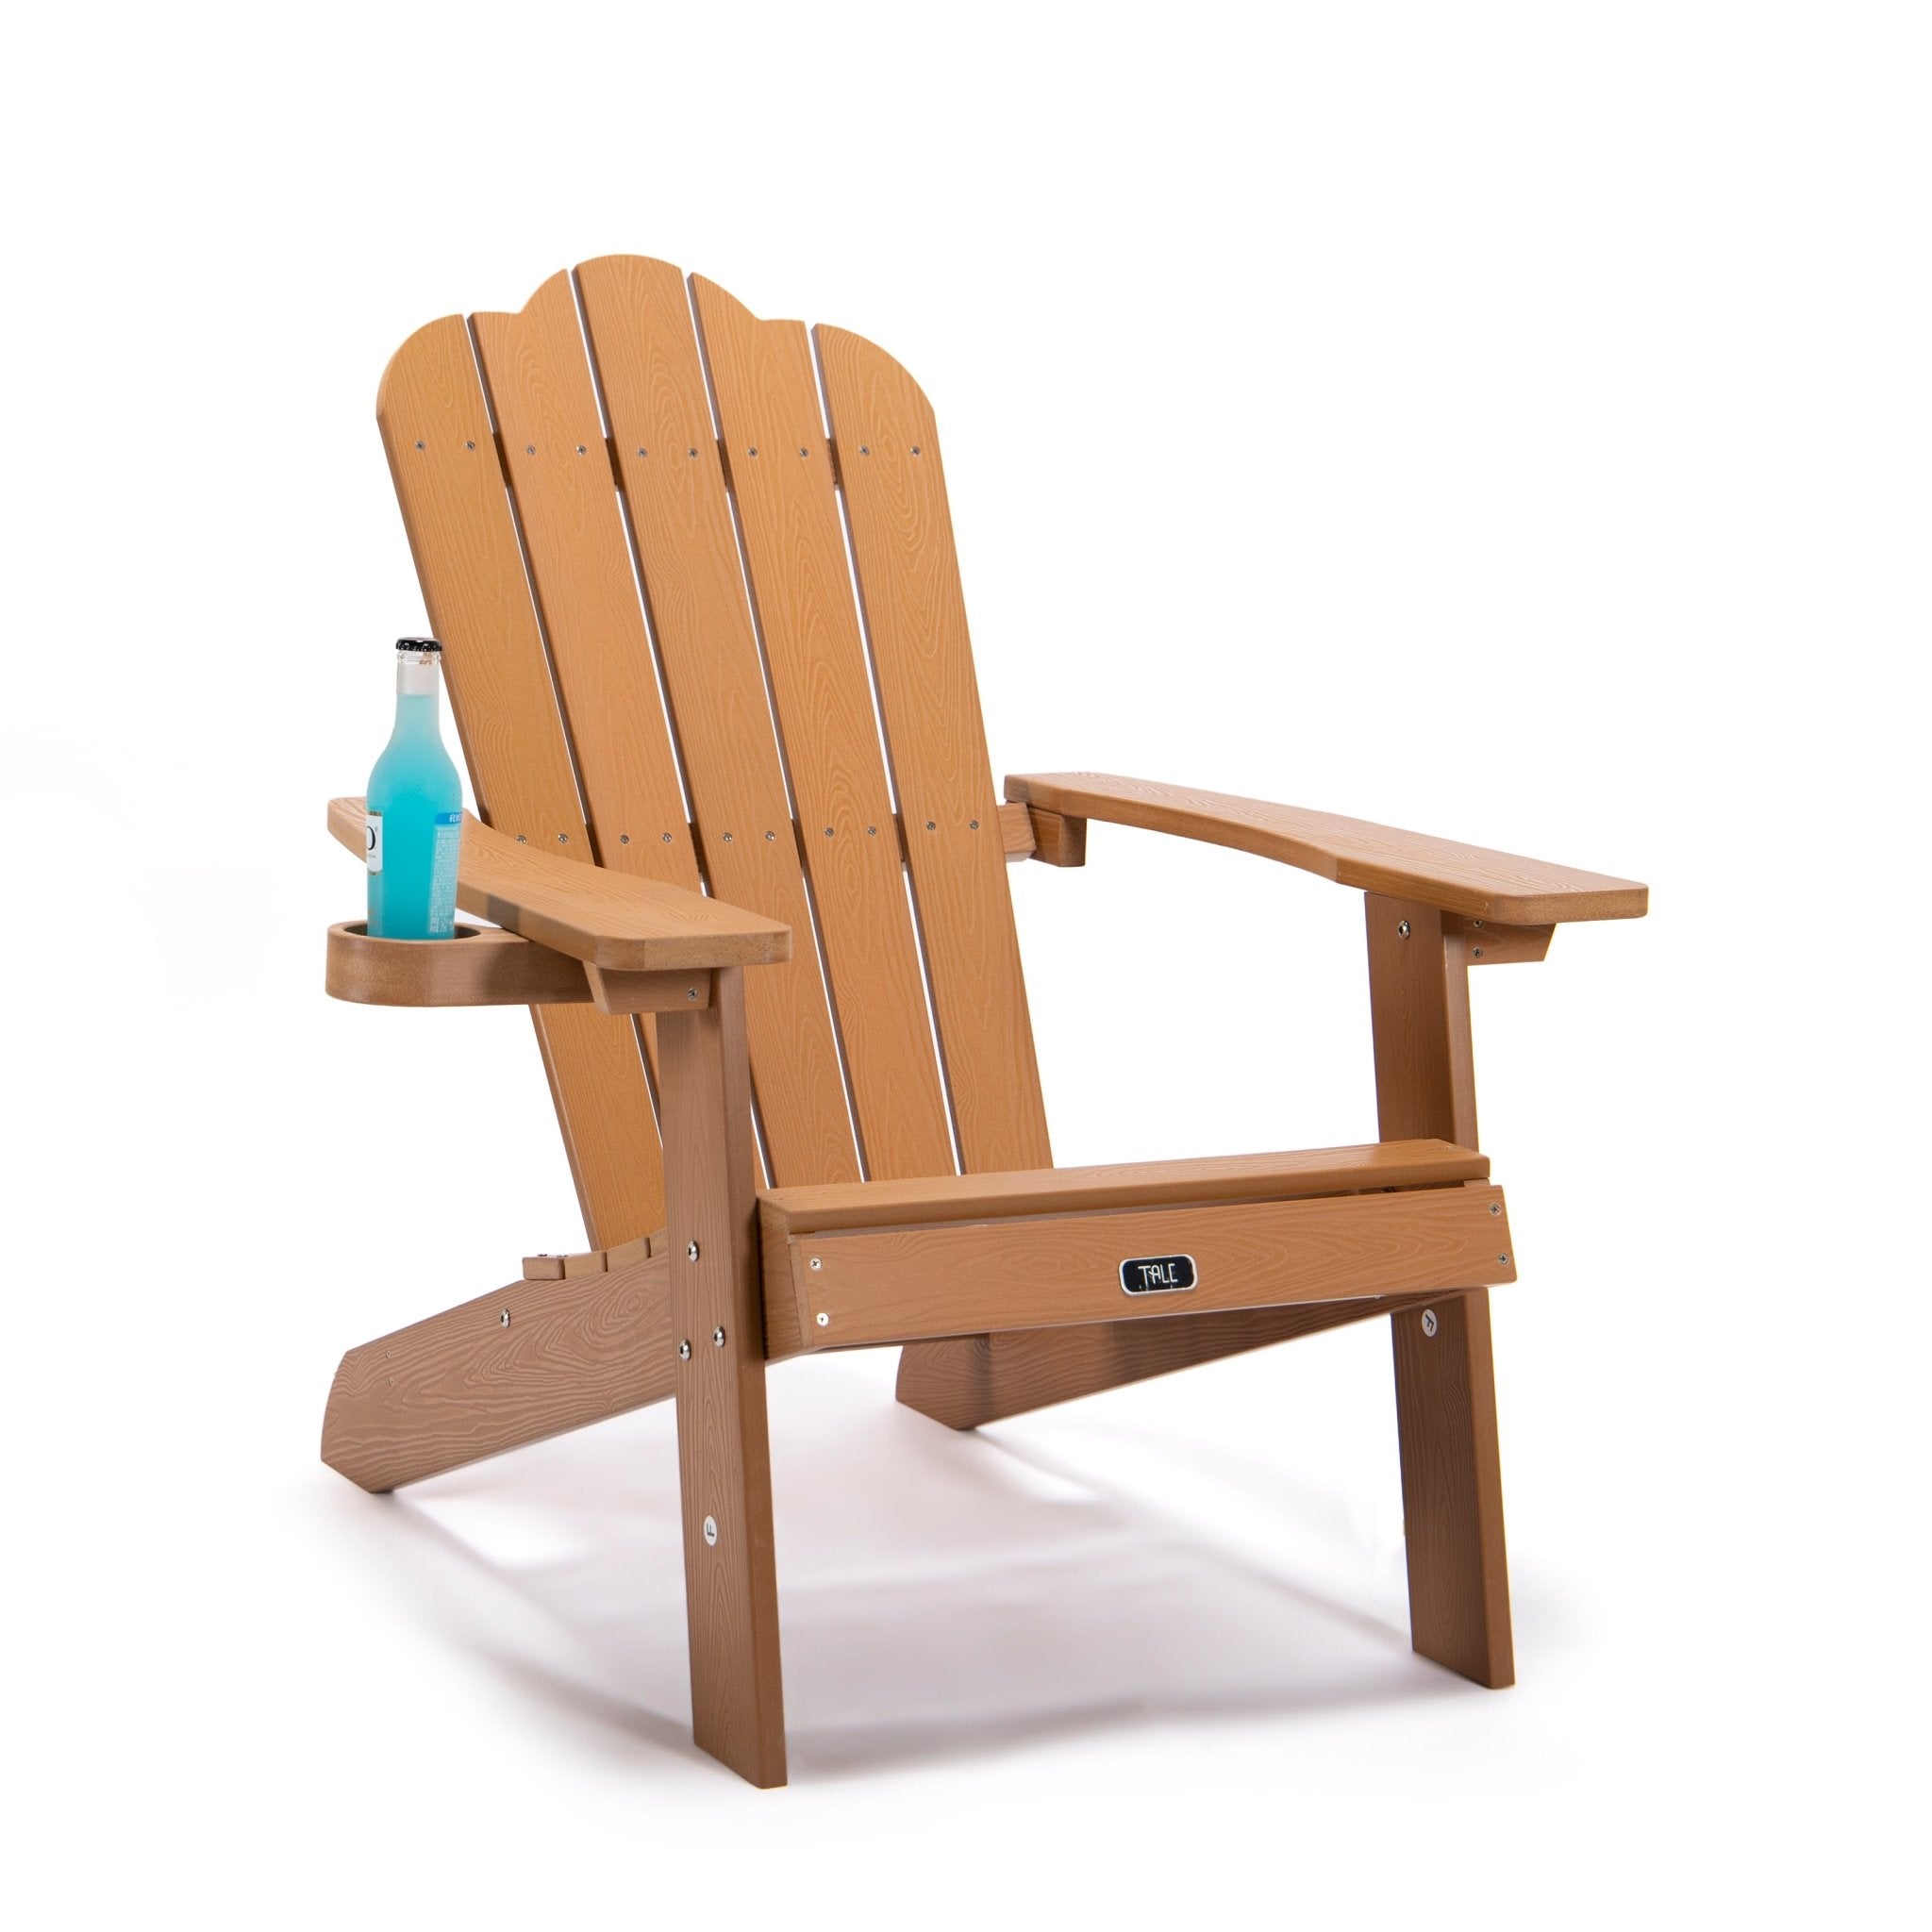 TALE Adirondack Chair Outdoor Furniture Painted Seating With Cup Holder All-Weather Fade-Resistant Plastic Wood - Outdoor Chairs -  Trend Goods